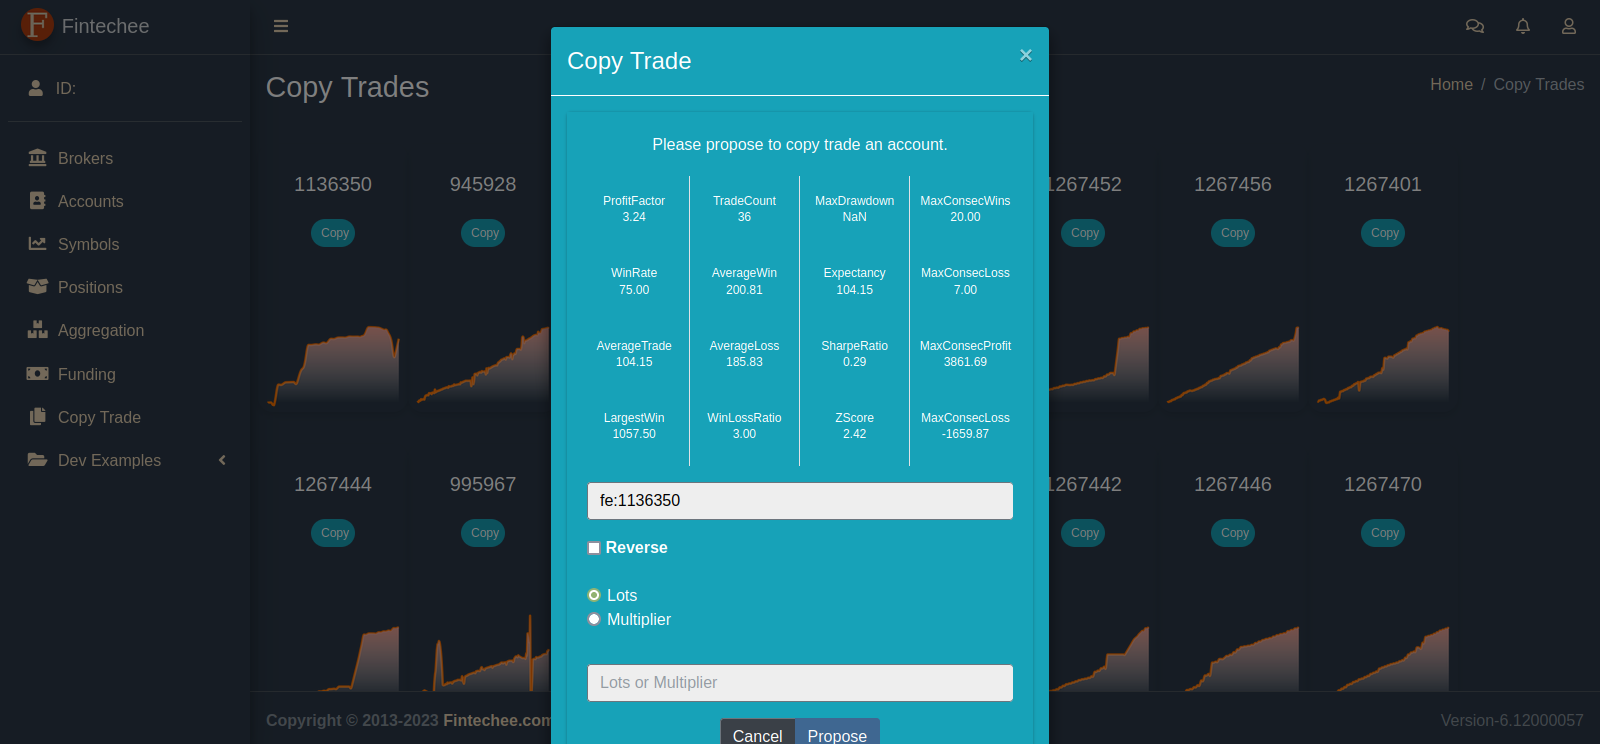 Copy Trading - Fintechee offers a copy trading supported trading platform. Cross-broker copy trading is supported as well.